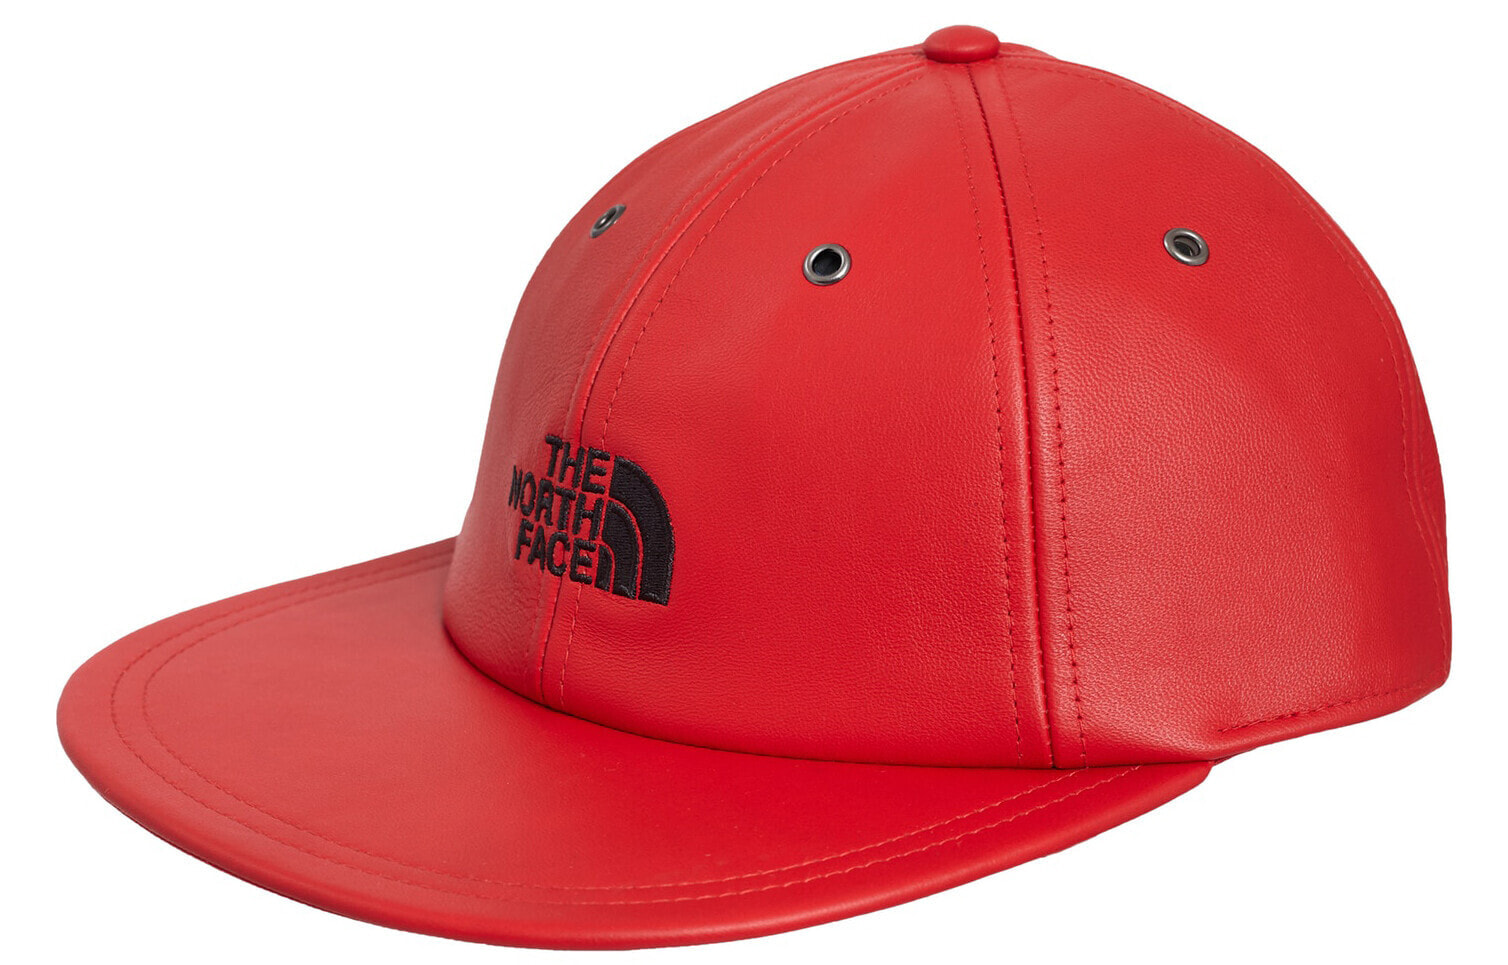 Supreme FW18 The North Face Leather 6-Panel Red 北面联名 皮质棒球帽 红色 / Шапка Supreme FW18 The North Face Leather 6-Panel Red SUP-FW18-609